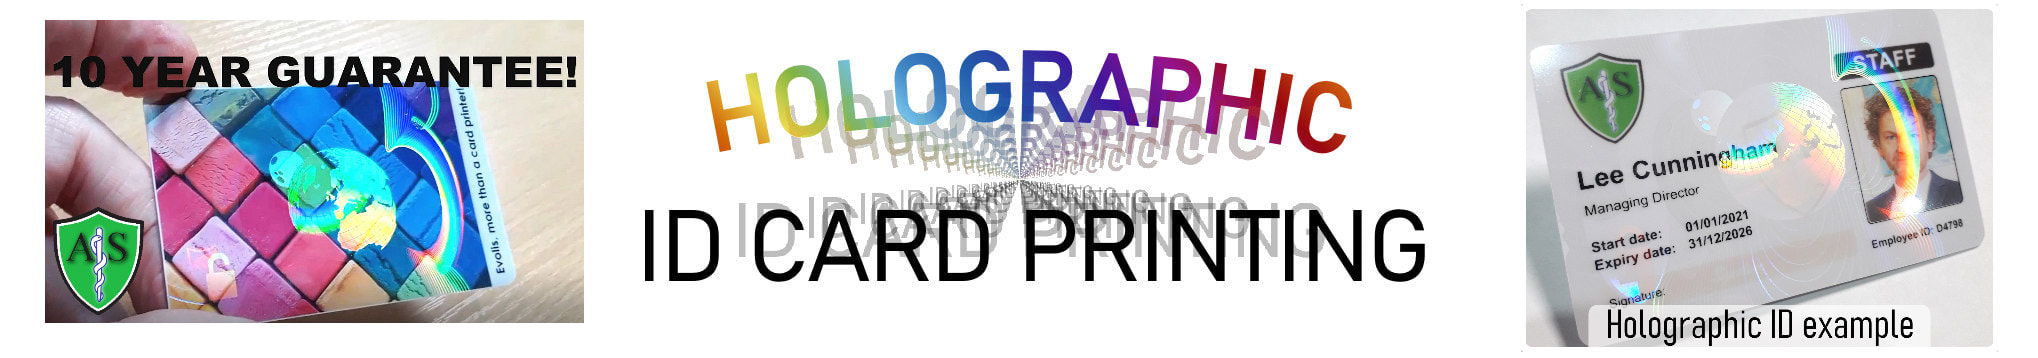 Wolverhampton holographic ID card print service. Employee Identity cards with hologram or holograph security mark.